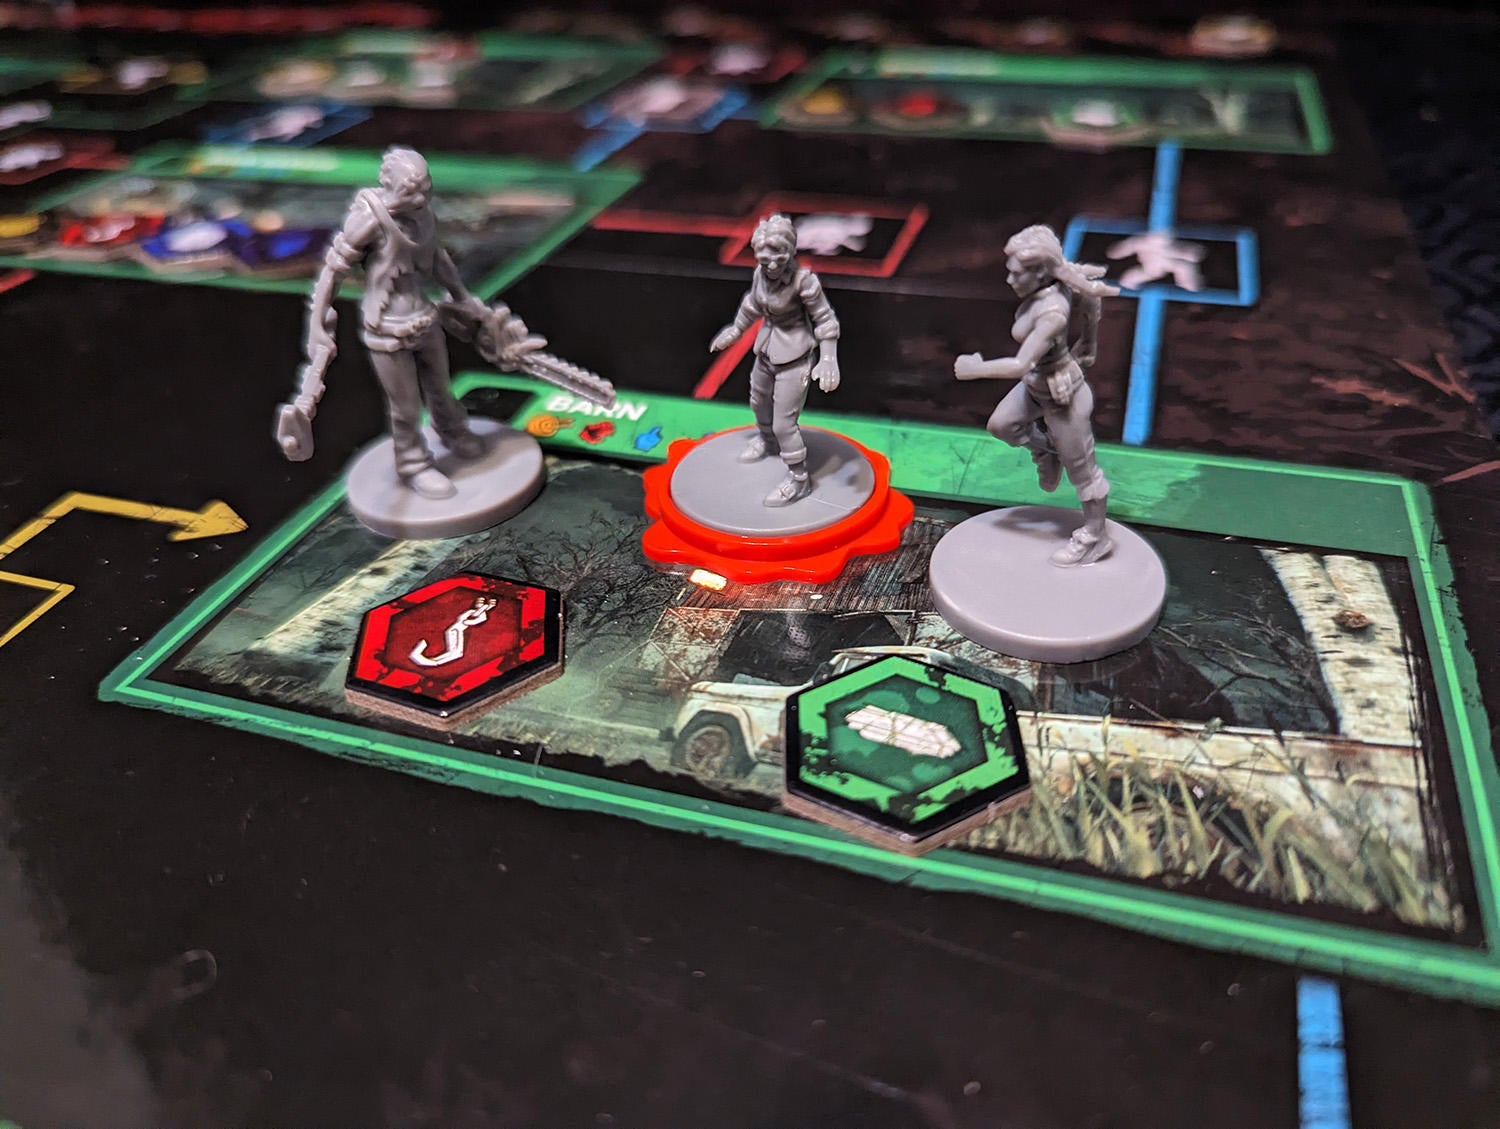 Dead by Daylight: The Board Game Review - Survival Horror That